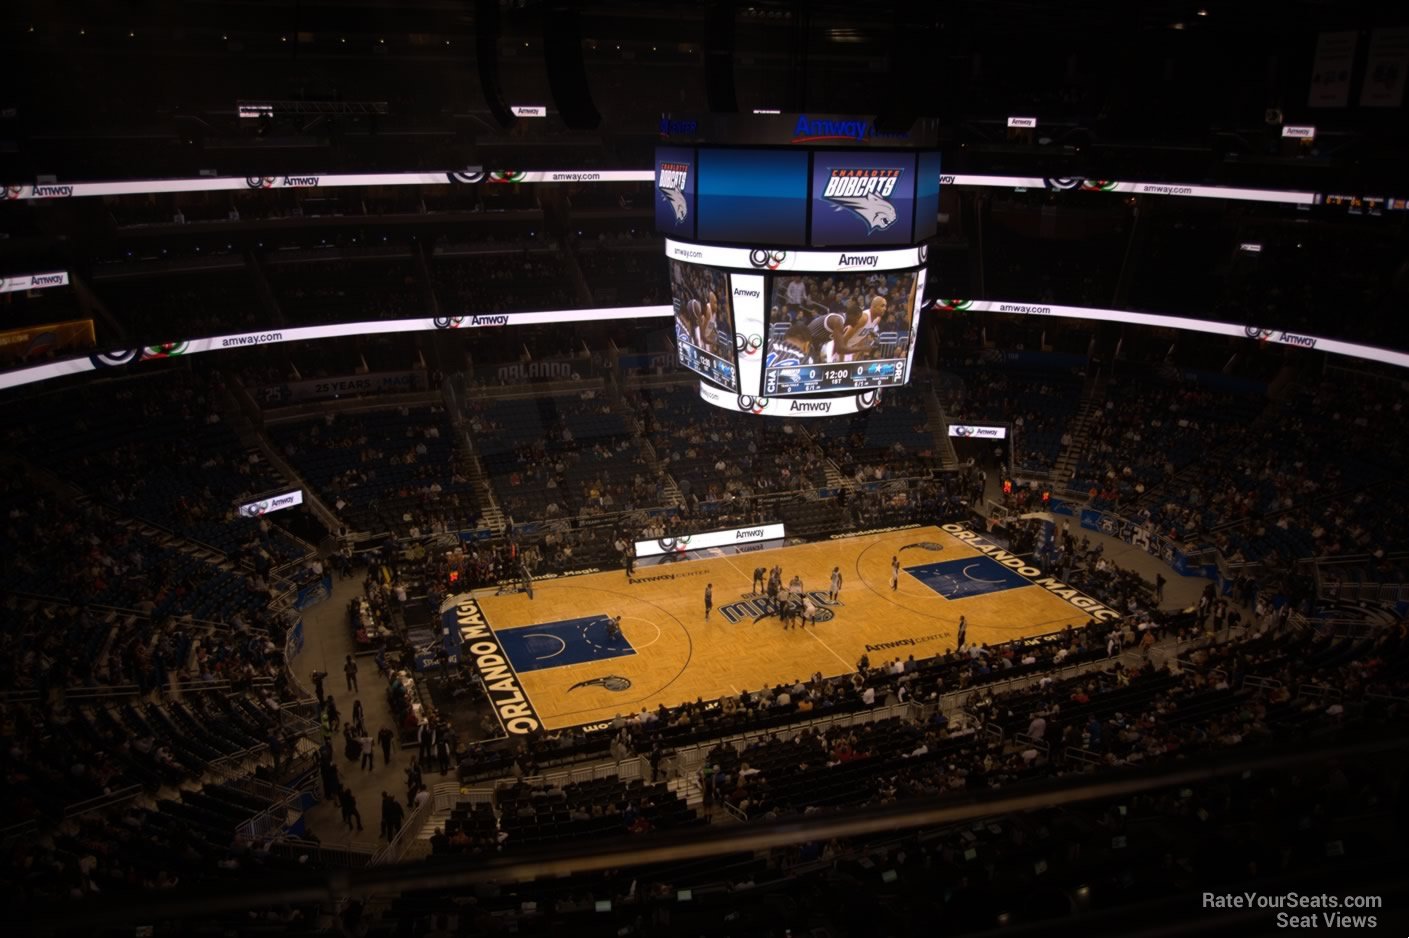 section 227 seat view  for basketball - amway center